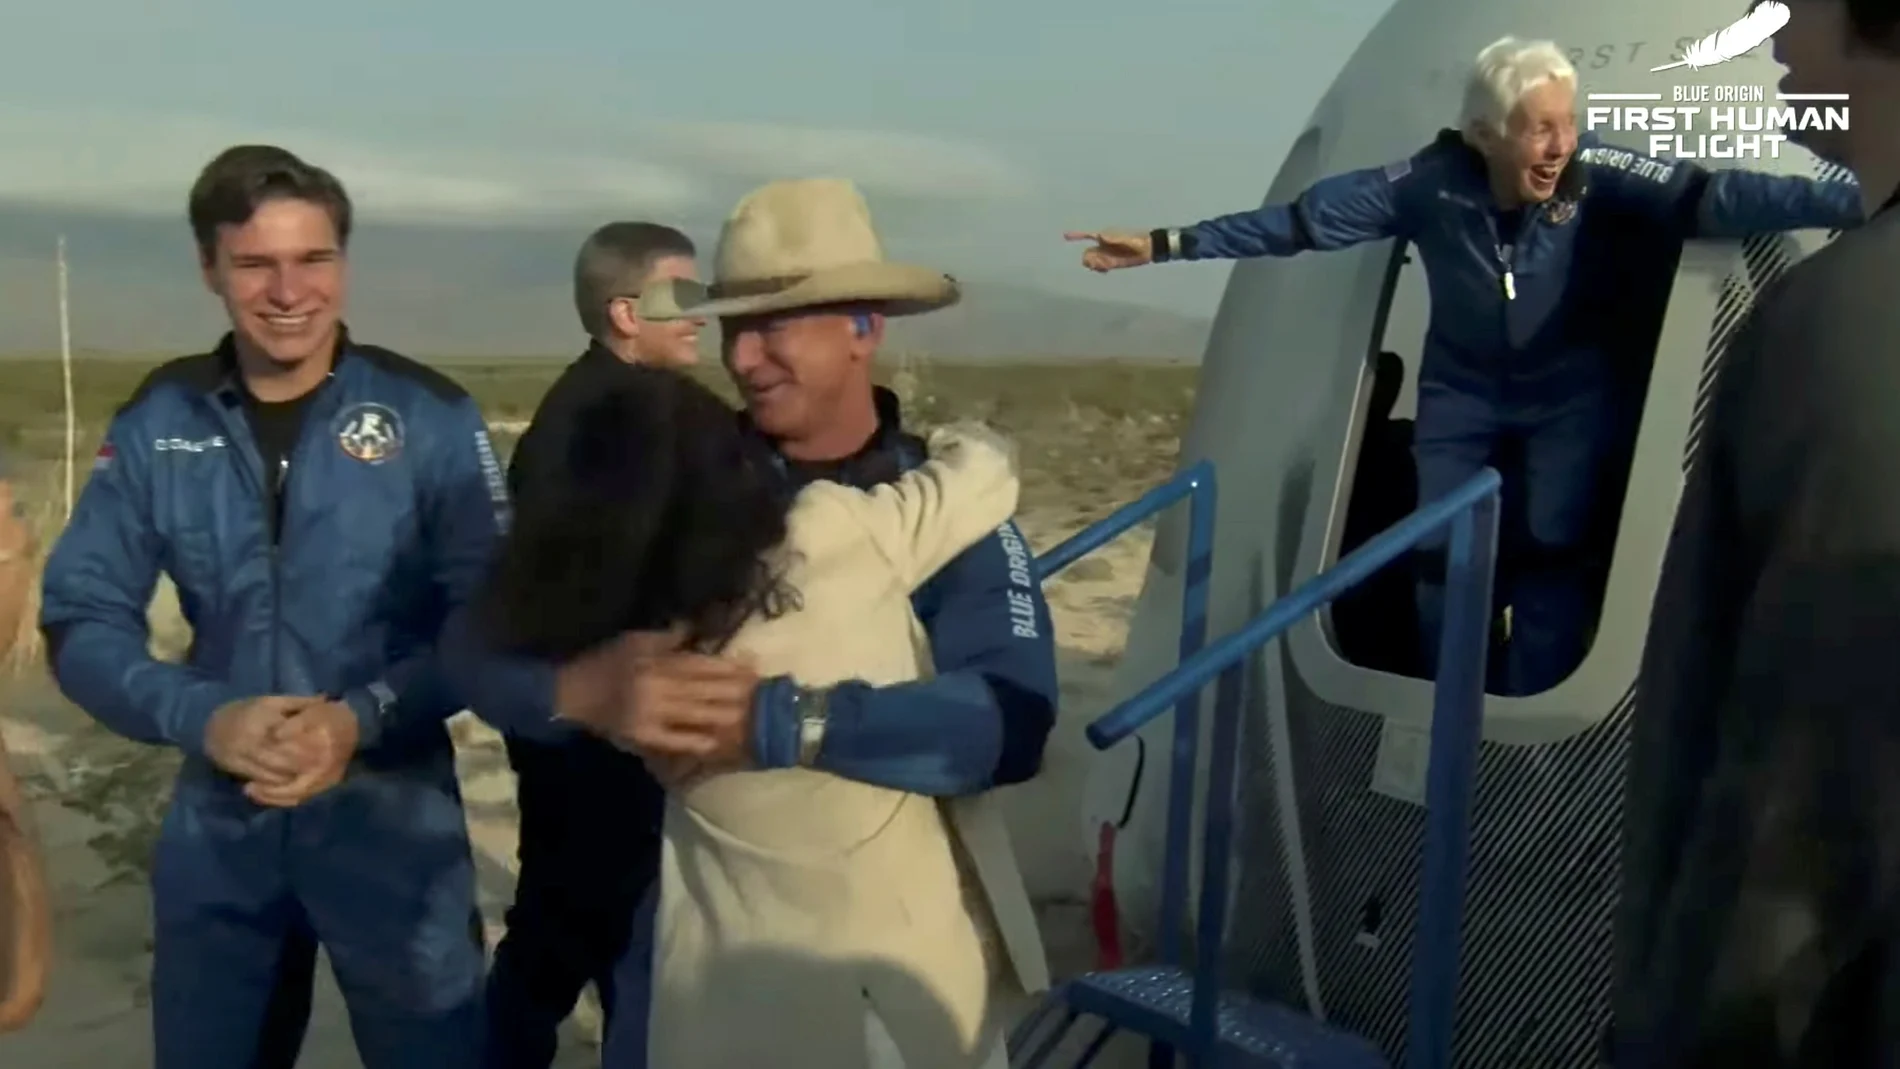 Billionaire businessman Jeff Bezos, recent Dutch high school graduate Oliver Daemen and pioneering female aviator Wally Funk emerge from their capsule after their flight aboard Blue Origin's New Shepard rocket on the world's first unpiloted suborbital flight near Van Horn, Texas, U.S., July 20, 2021 in a still image from video. Blue Origin/Handout via REUTERS. NO RESALES. NO ARCHIVES. THIS IMAGE HAS BEEN SUPPLIED BY A THIRD PARTY.